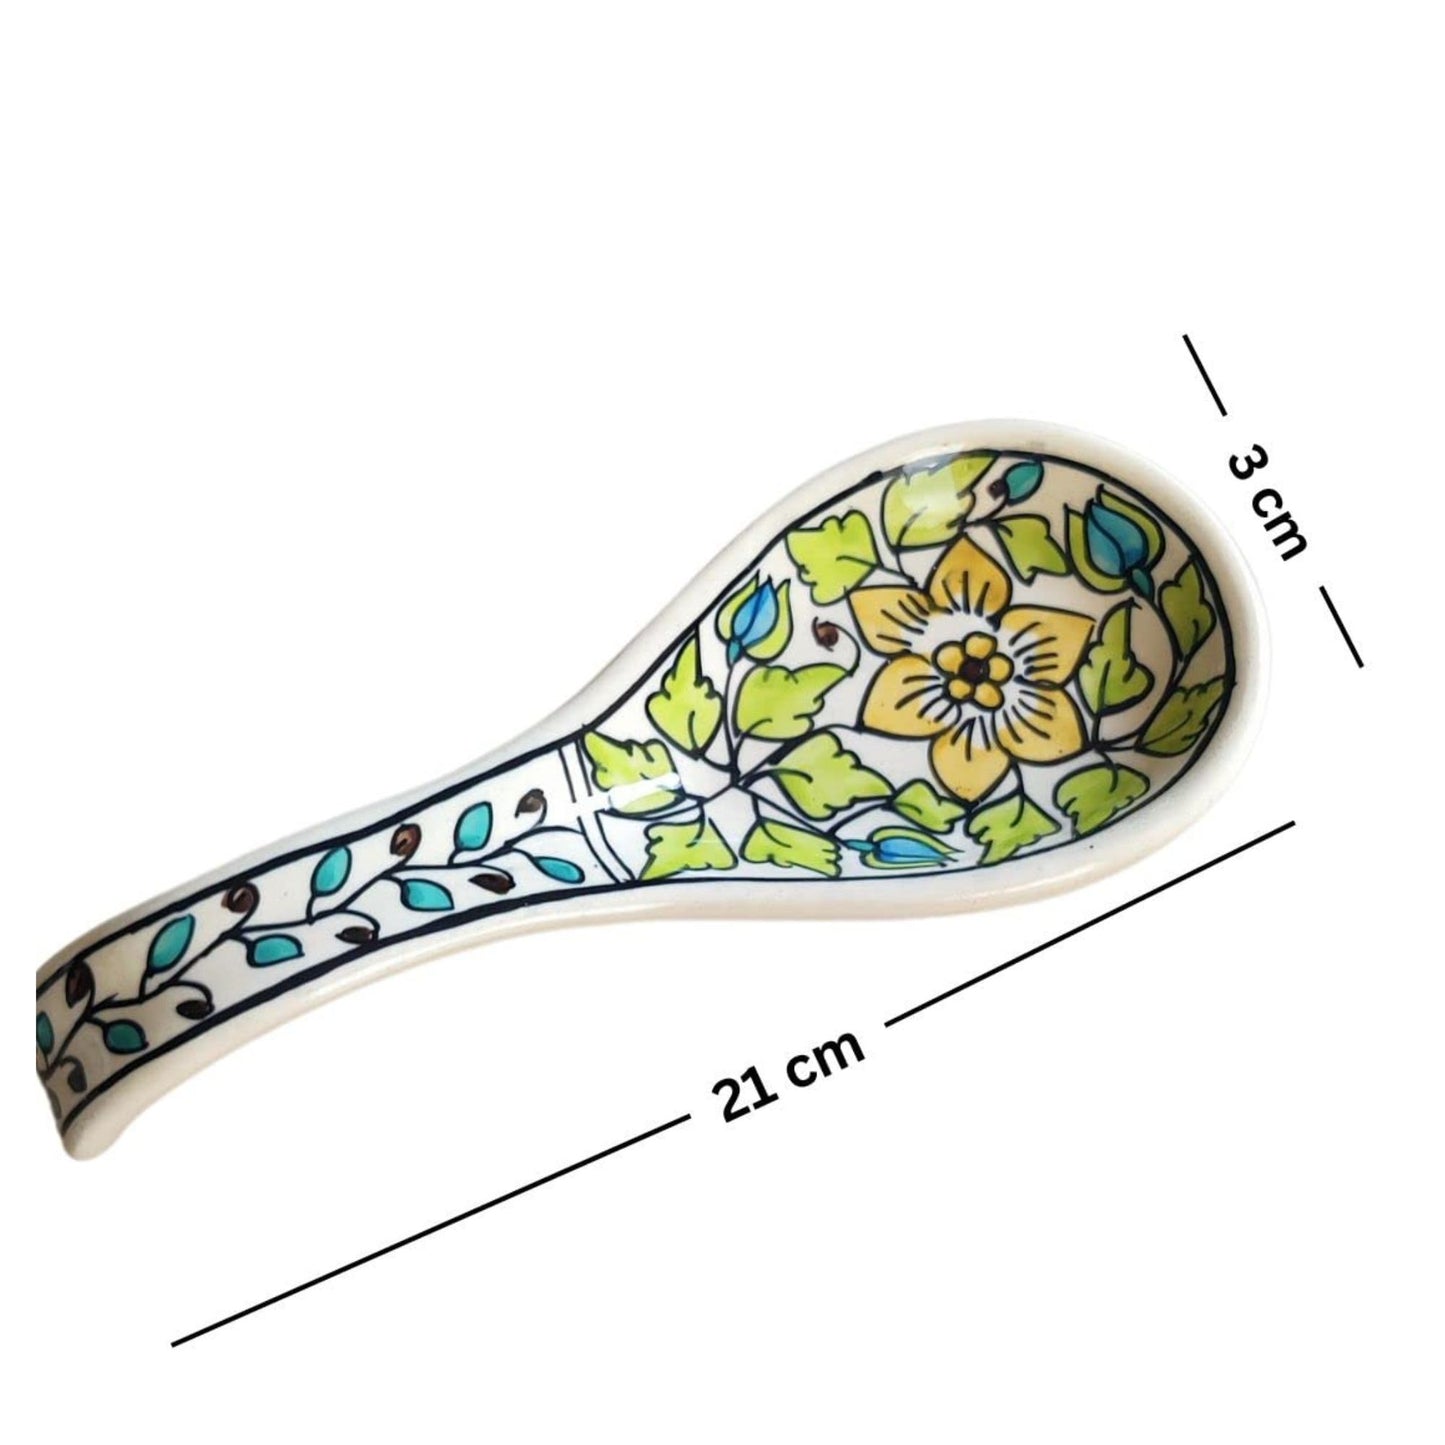 Mughal Floral' Hand-painted Ceramic Spoon Rest (Dishwasher Safe) - jasmeyhomes